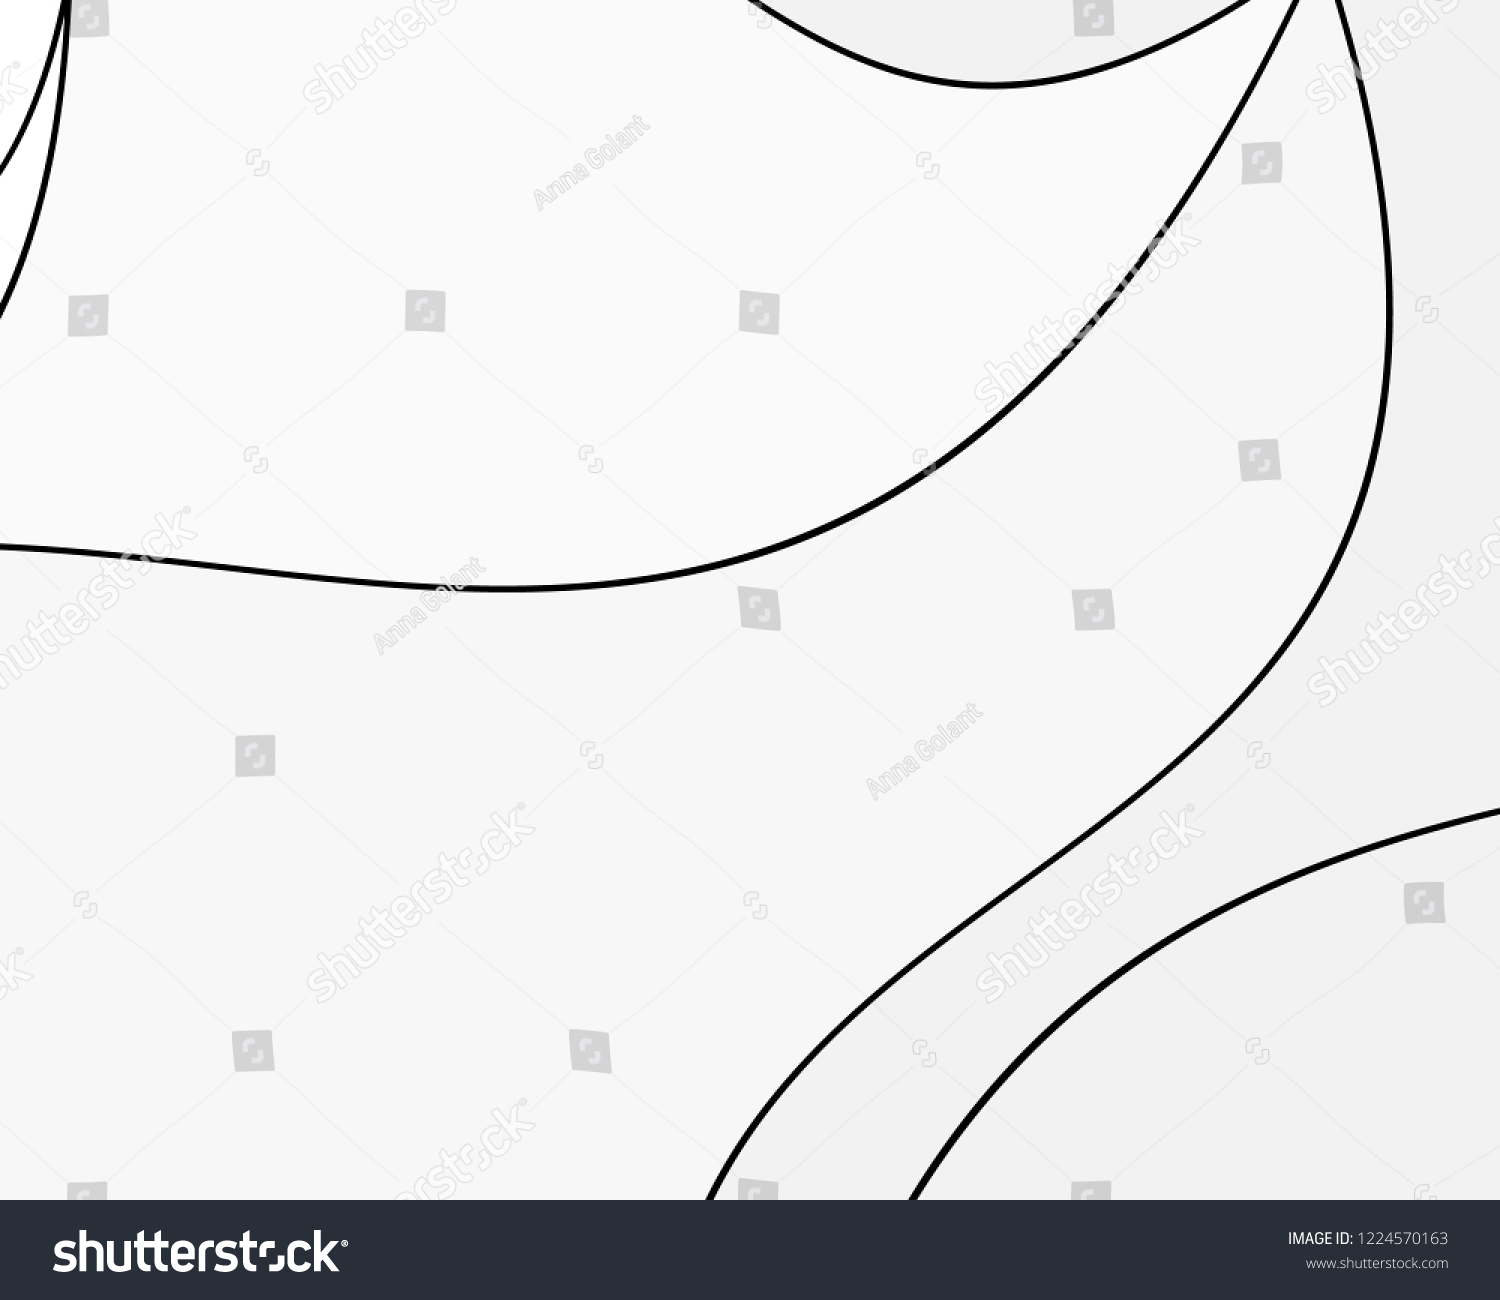 Elegant texture with wavy lines, abstract geometric pattern. Black and white vector illustration of design element for creating modern art backgrounds, patterns.  #1224570163